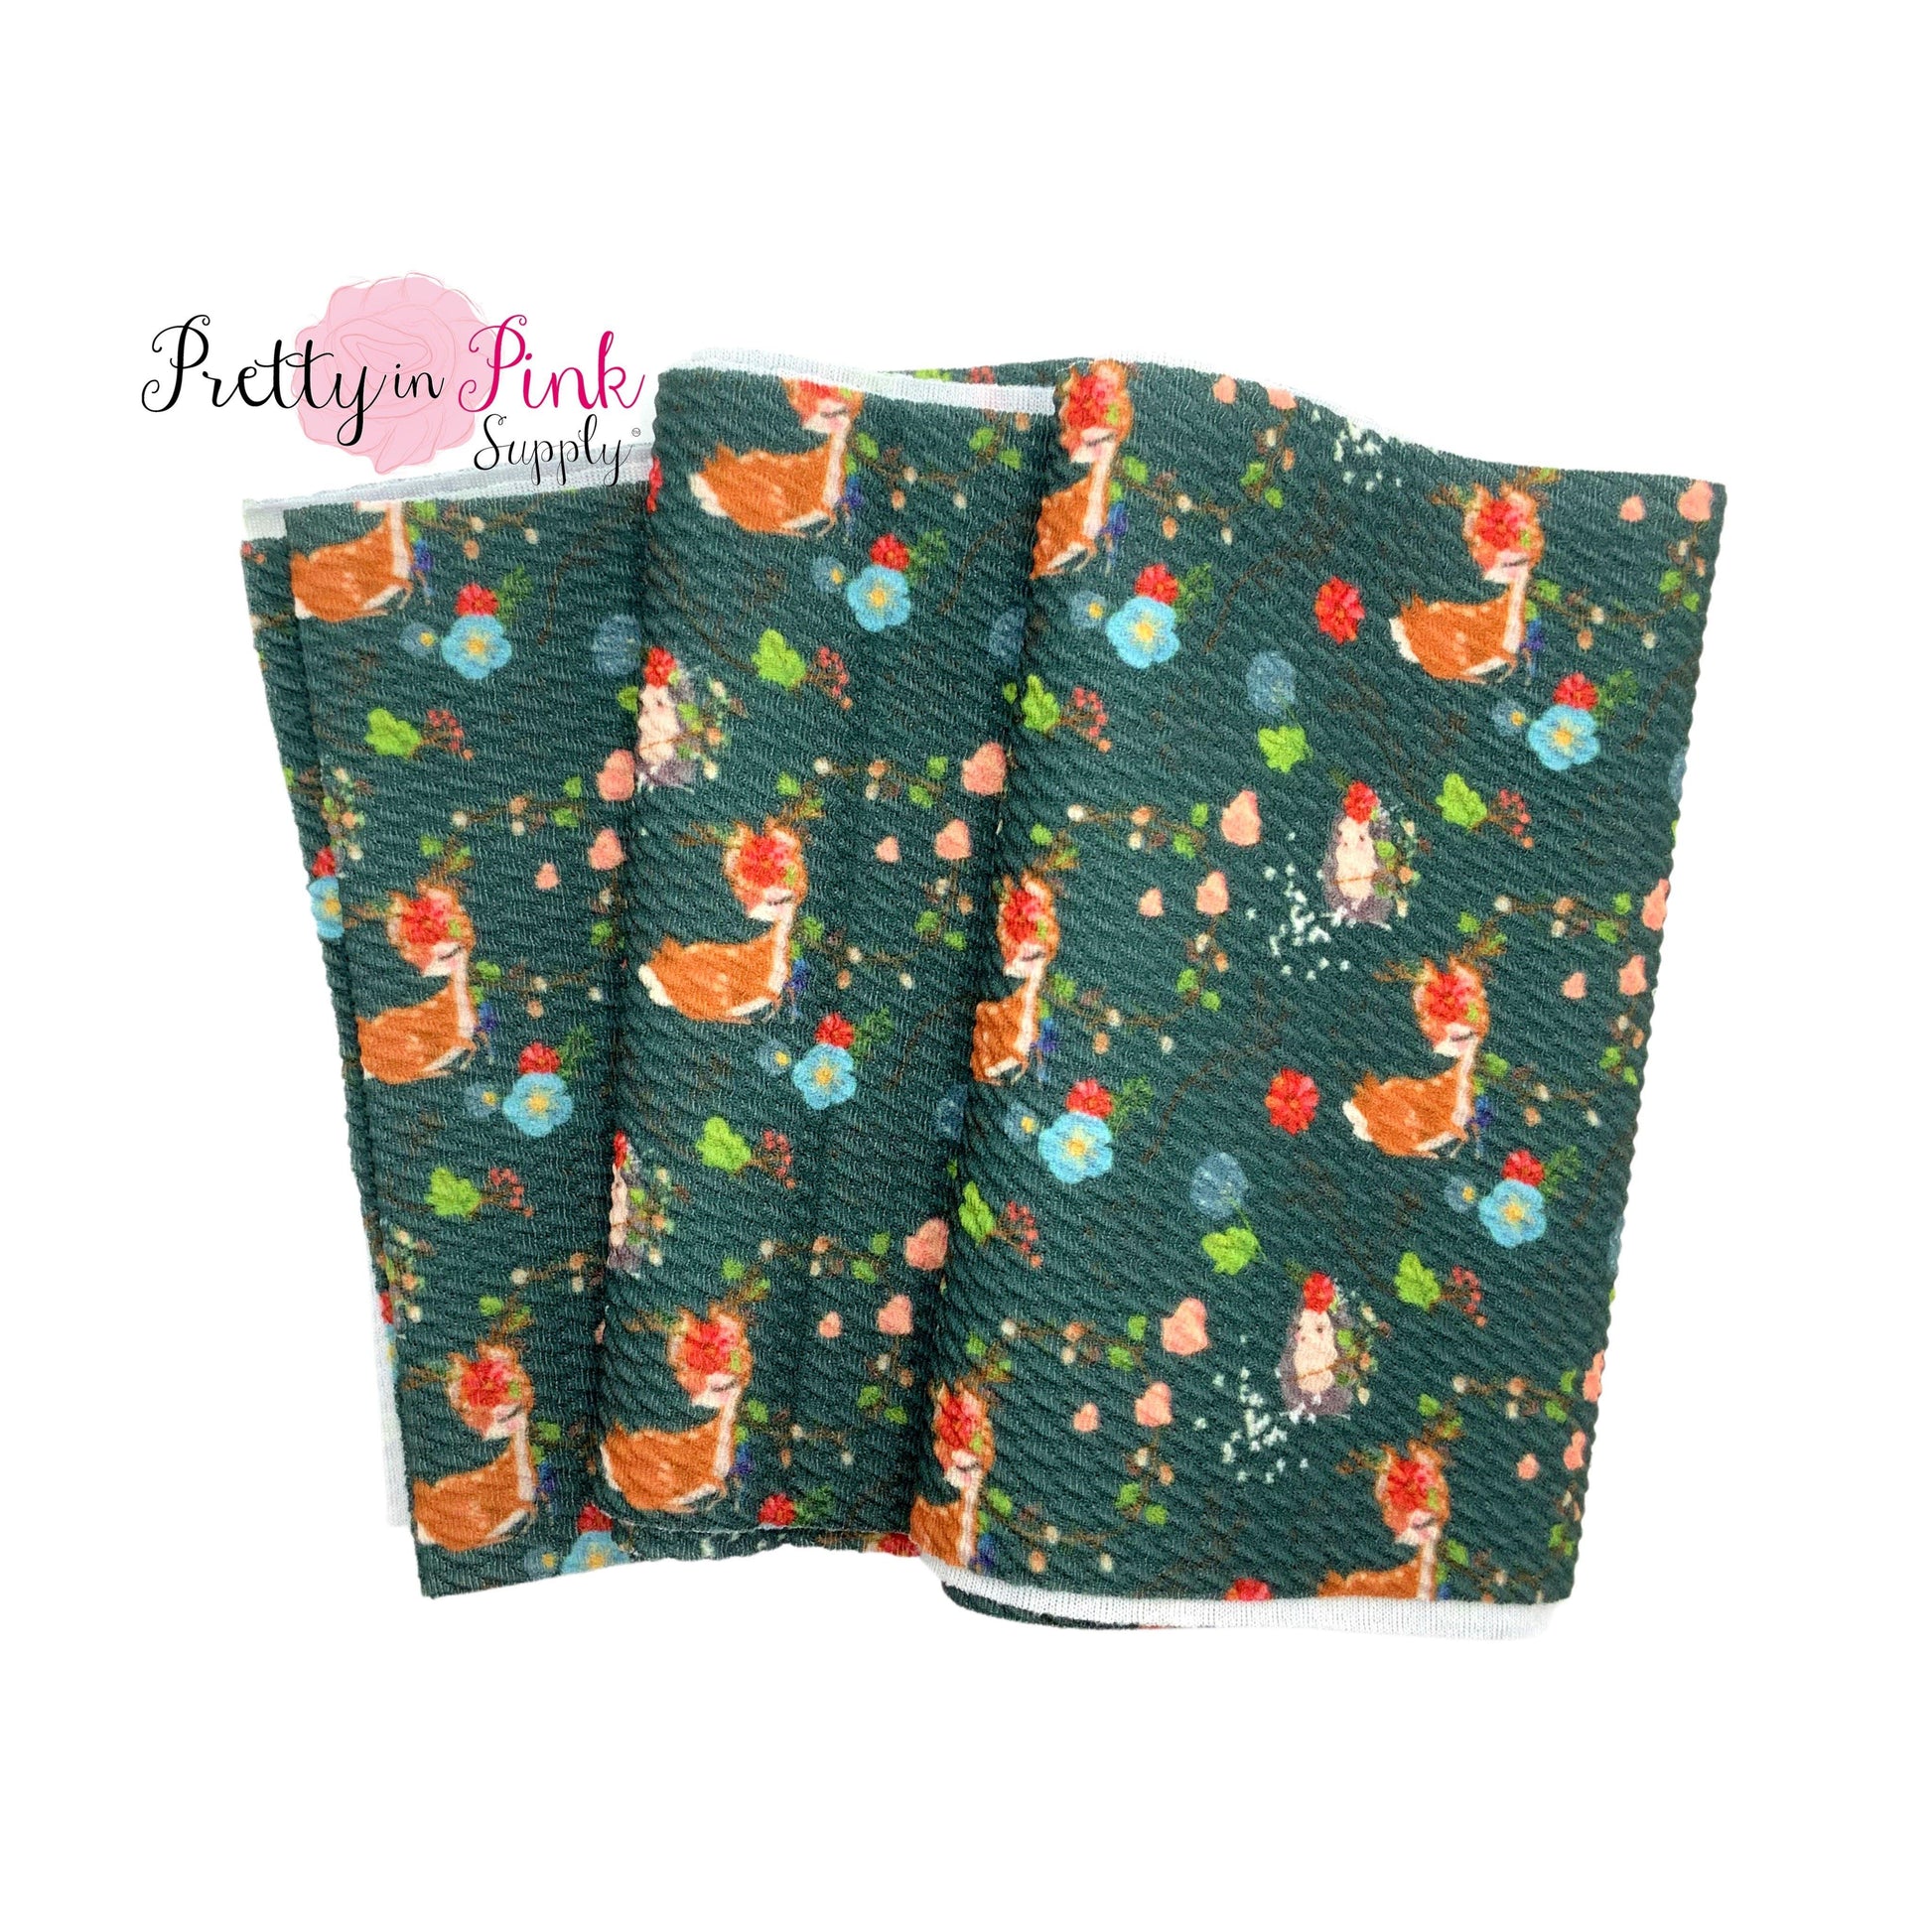 Dark Green Liverpool Fabric Strip with Deer and Hedgehog Floral Pattern